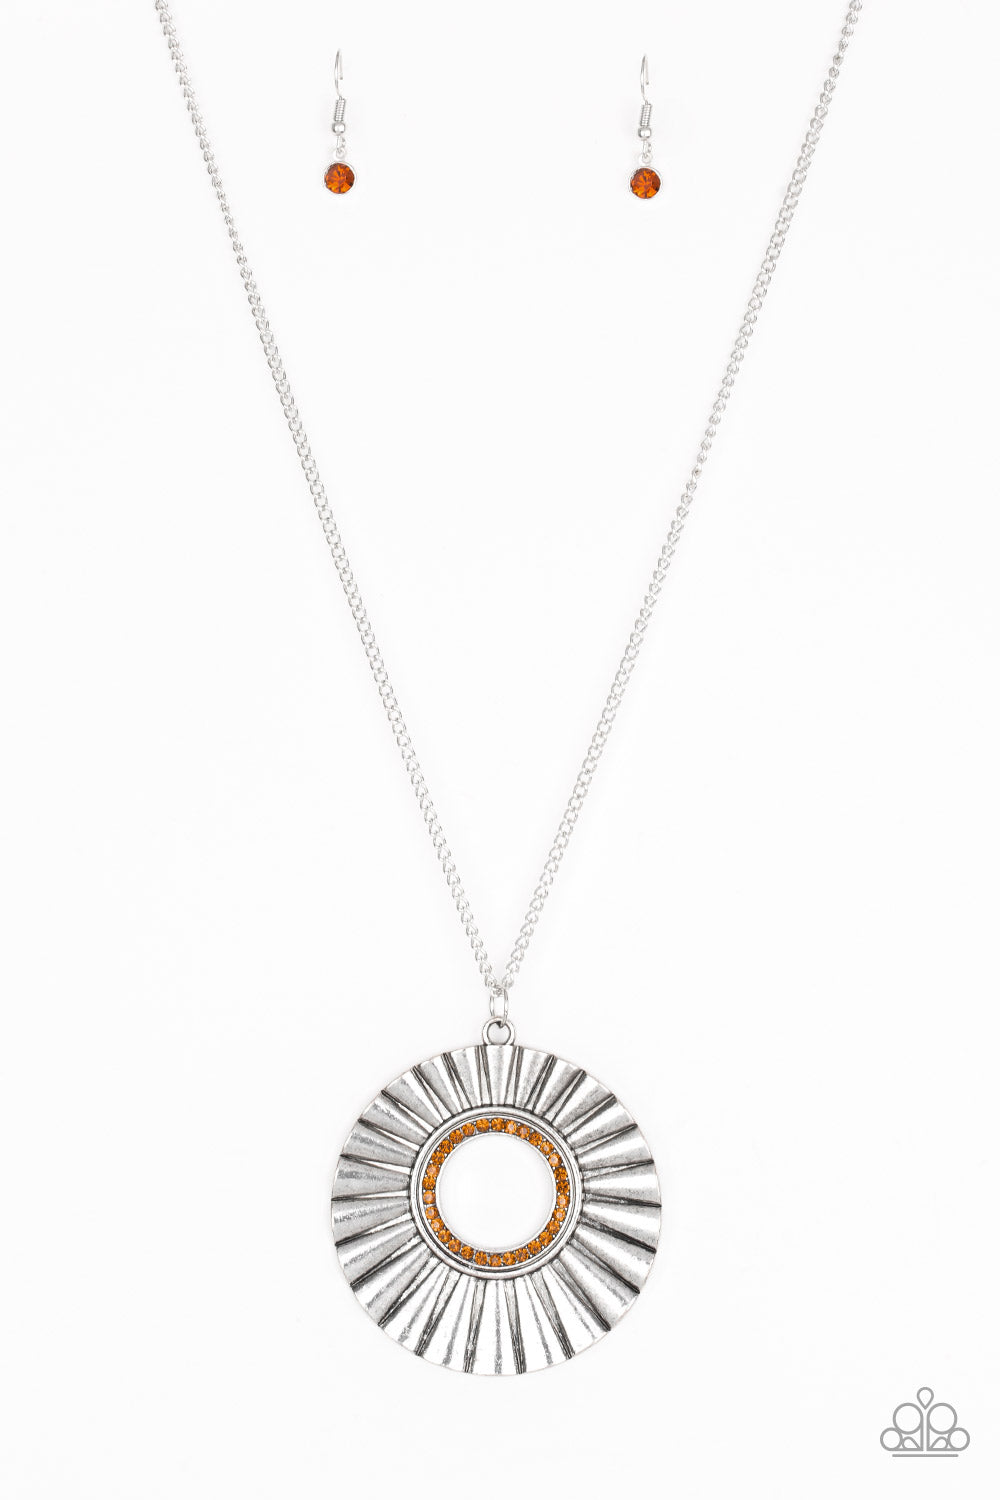 Paparazzi necklace - Chicly Centered - Brown